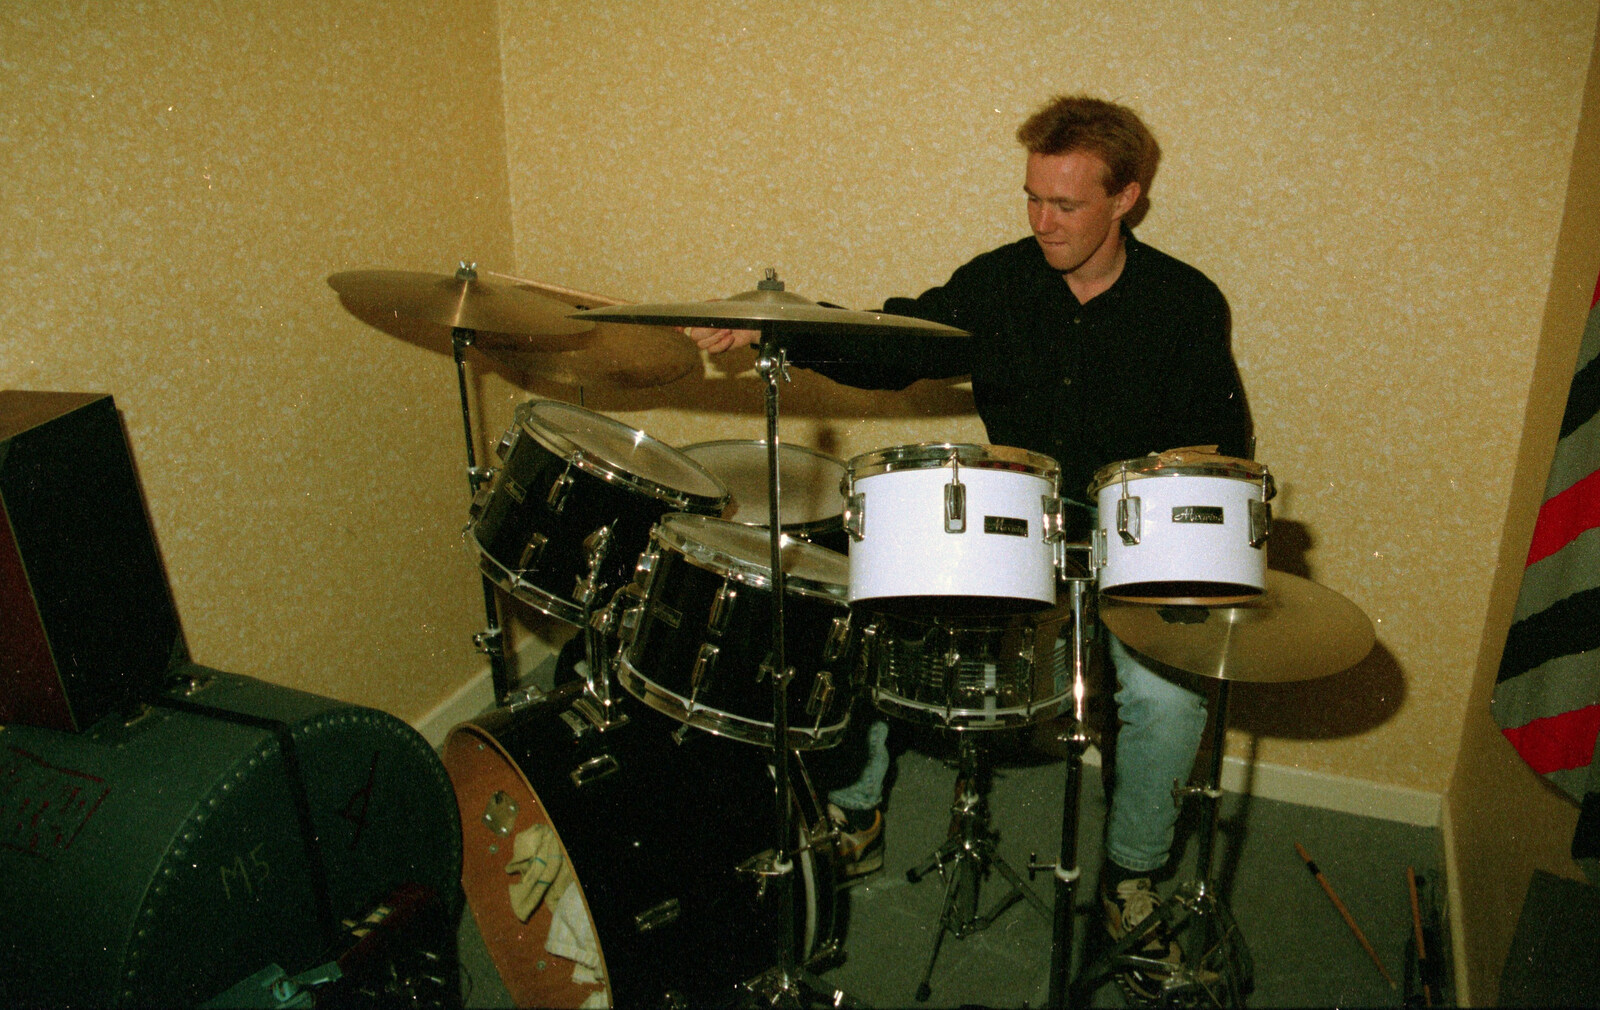 Martin on his drumkit from Soman-Wherry and a Drumkit, Norwich and Red House, Norfolk - 22nd July 1988